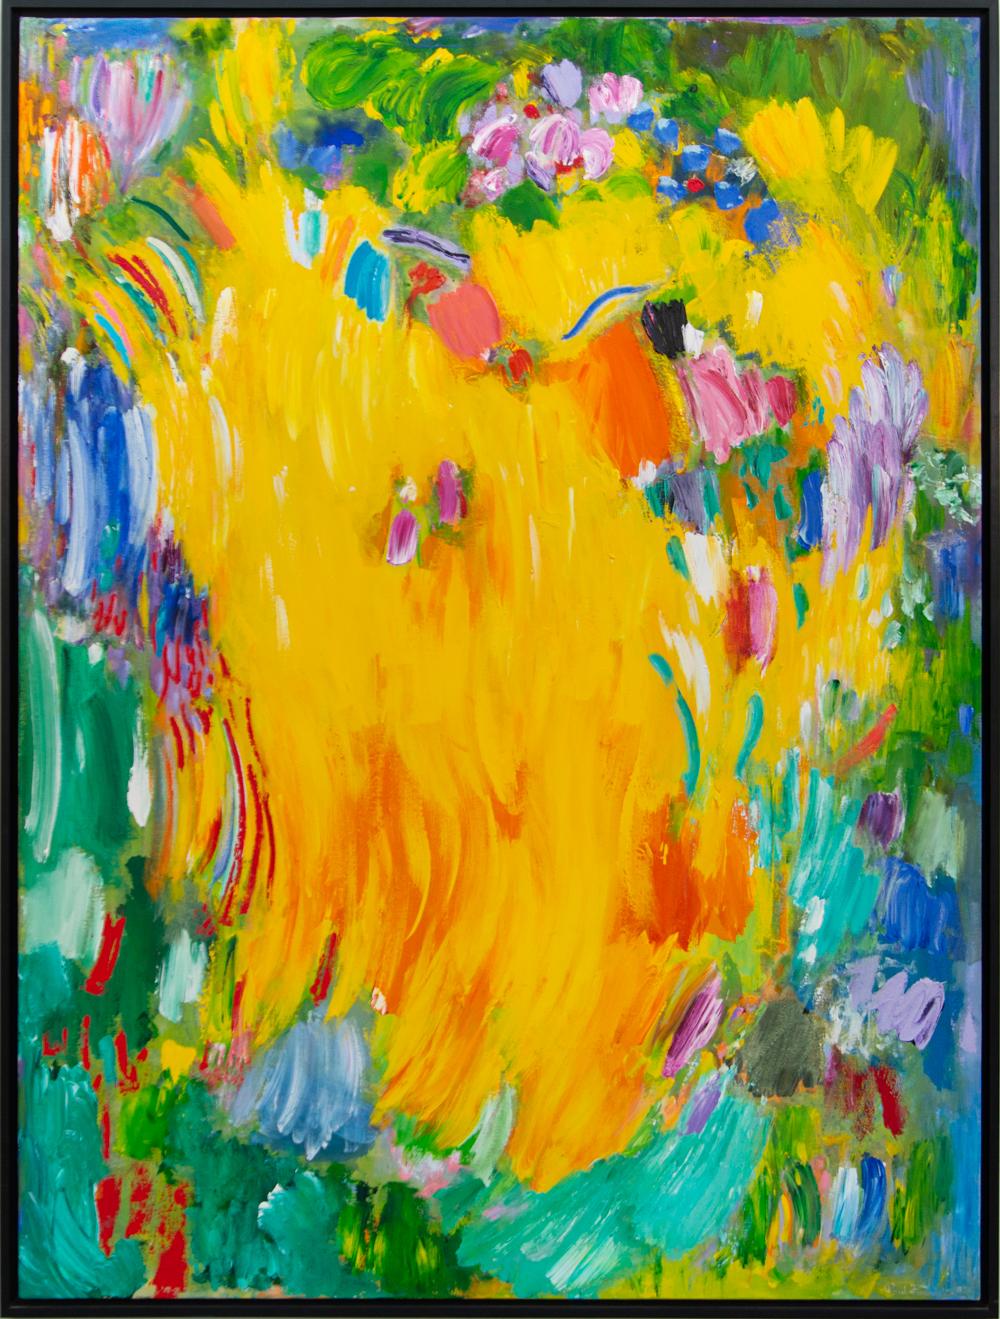 Paul Fournier Abstract Painting - Tropic Noon - large, bright, colorful, abstract expressionist, acrylic on canvas